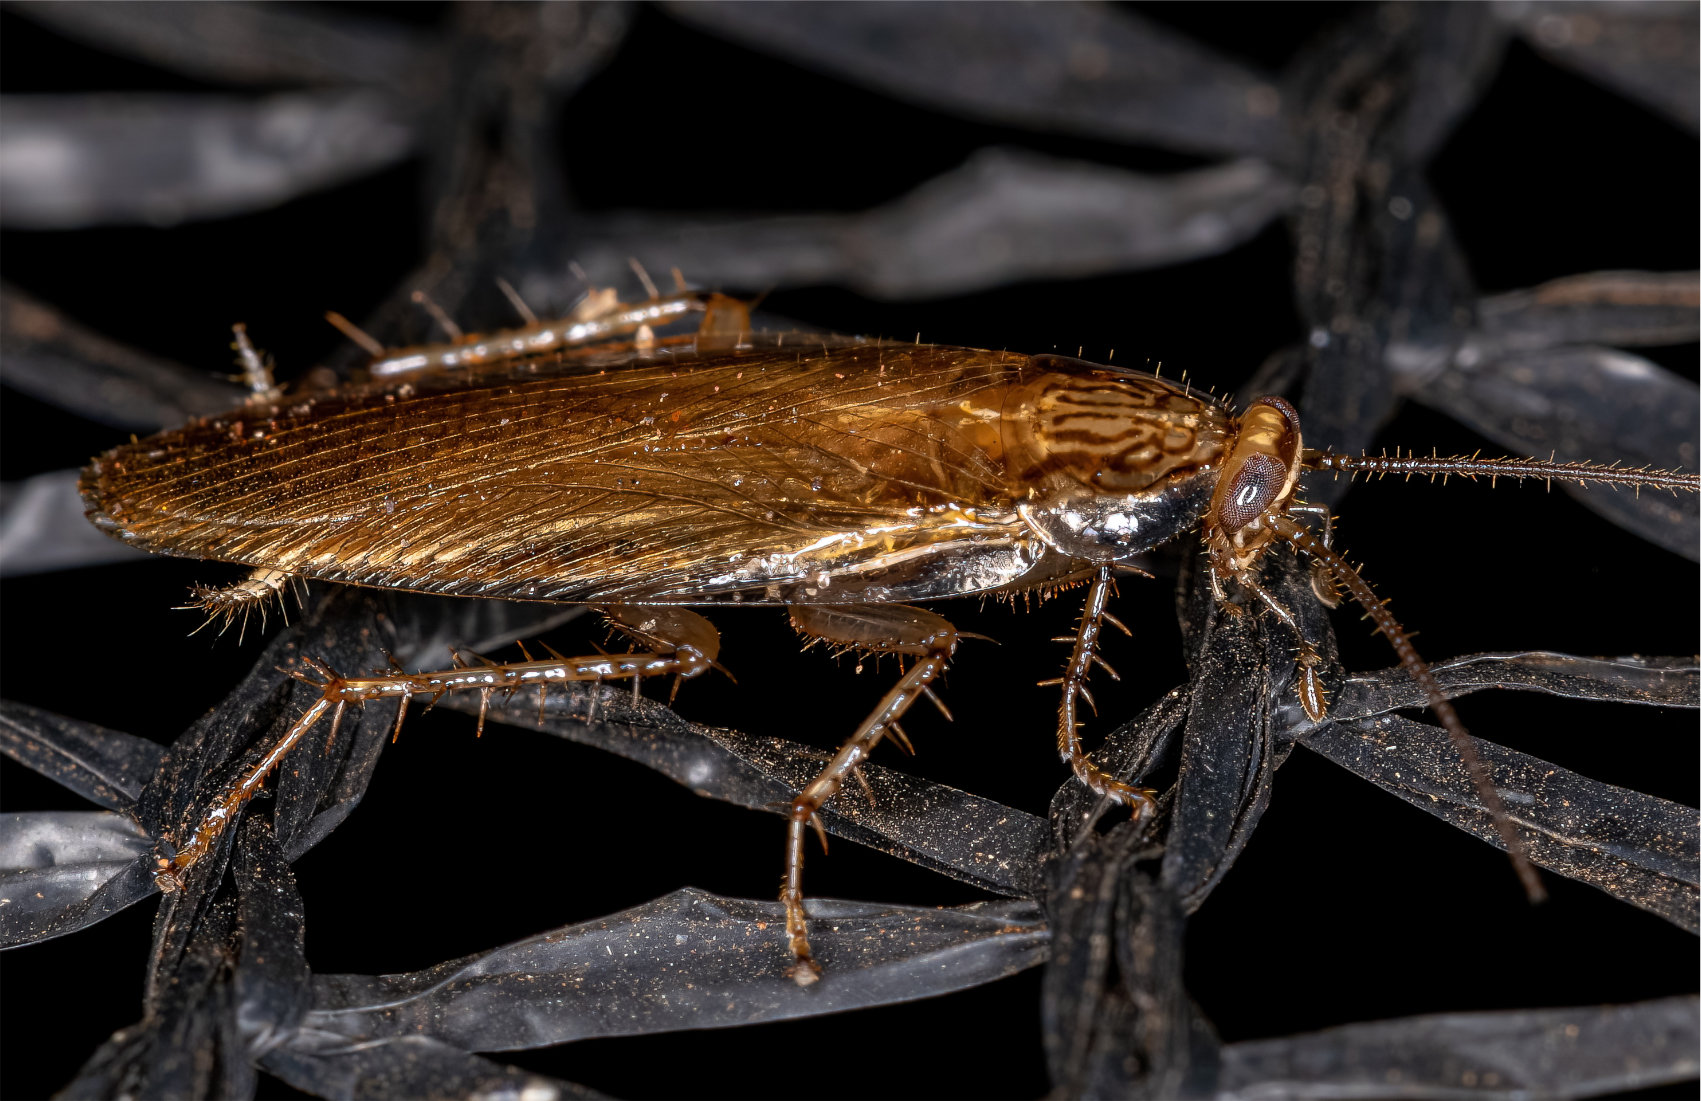 An image of German Cockroach Closeup showing all body details with high contrast